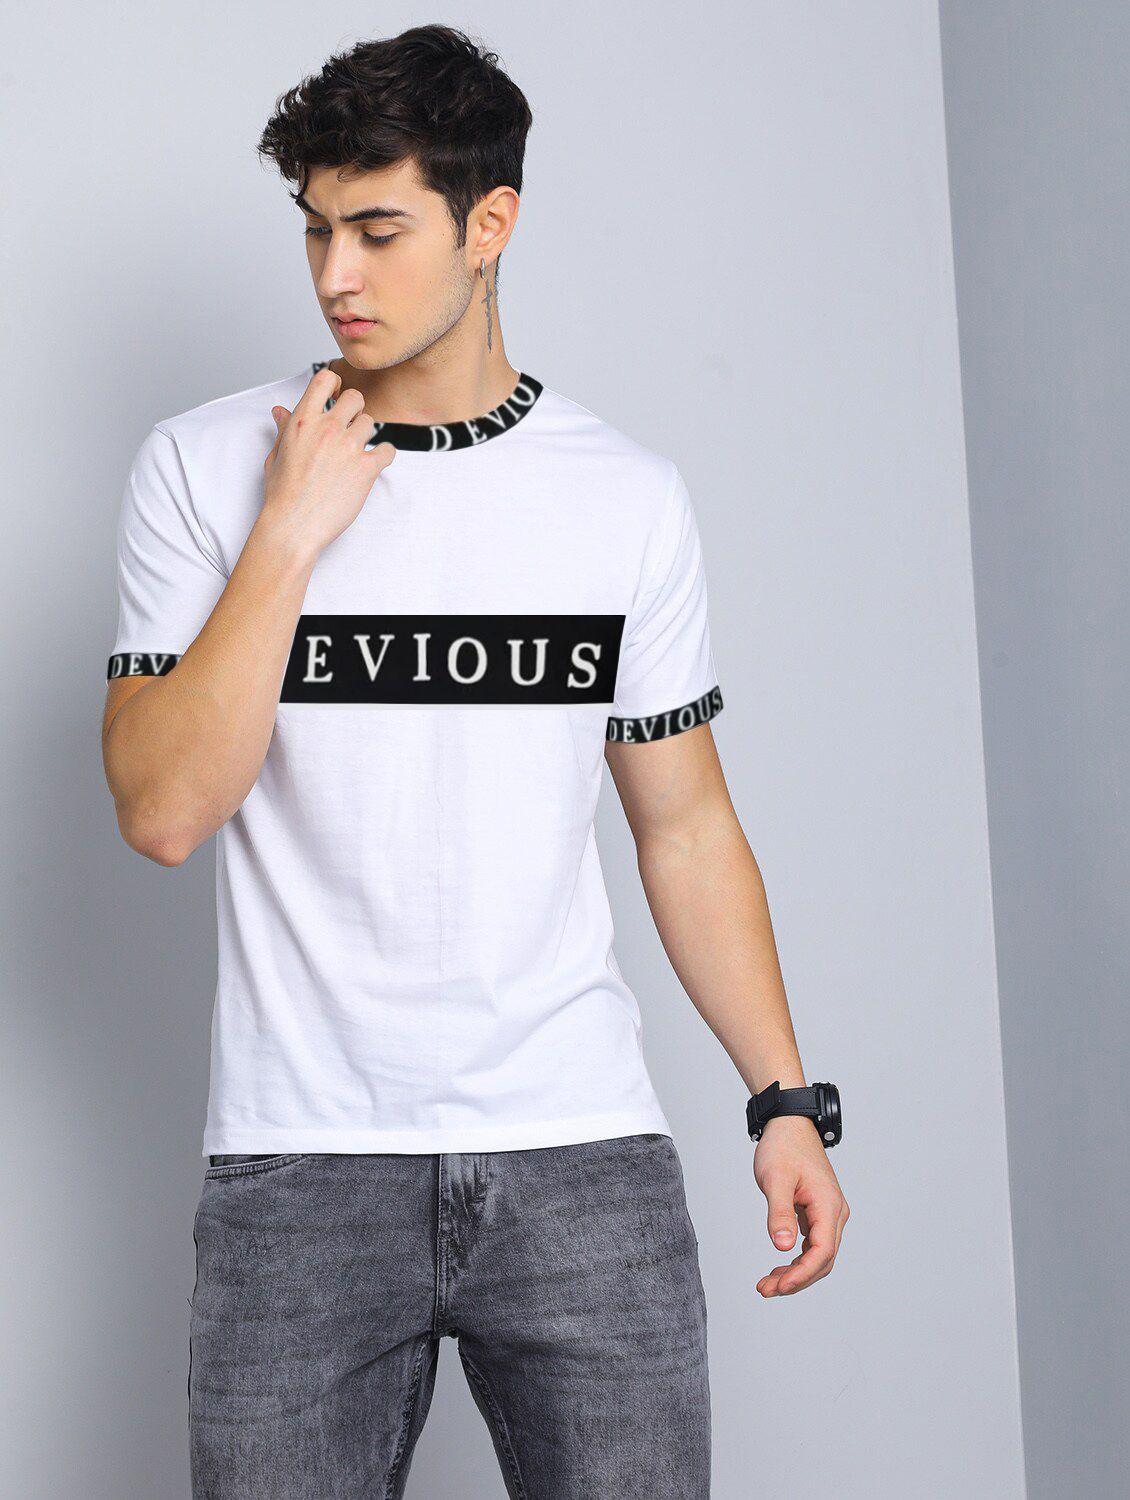 Cotton Blend Printed Full Sleeves Mens Round Neck T-Shirt